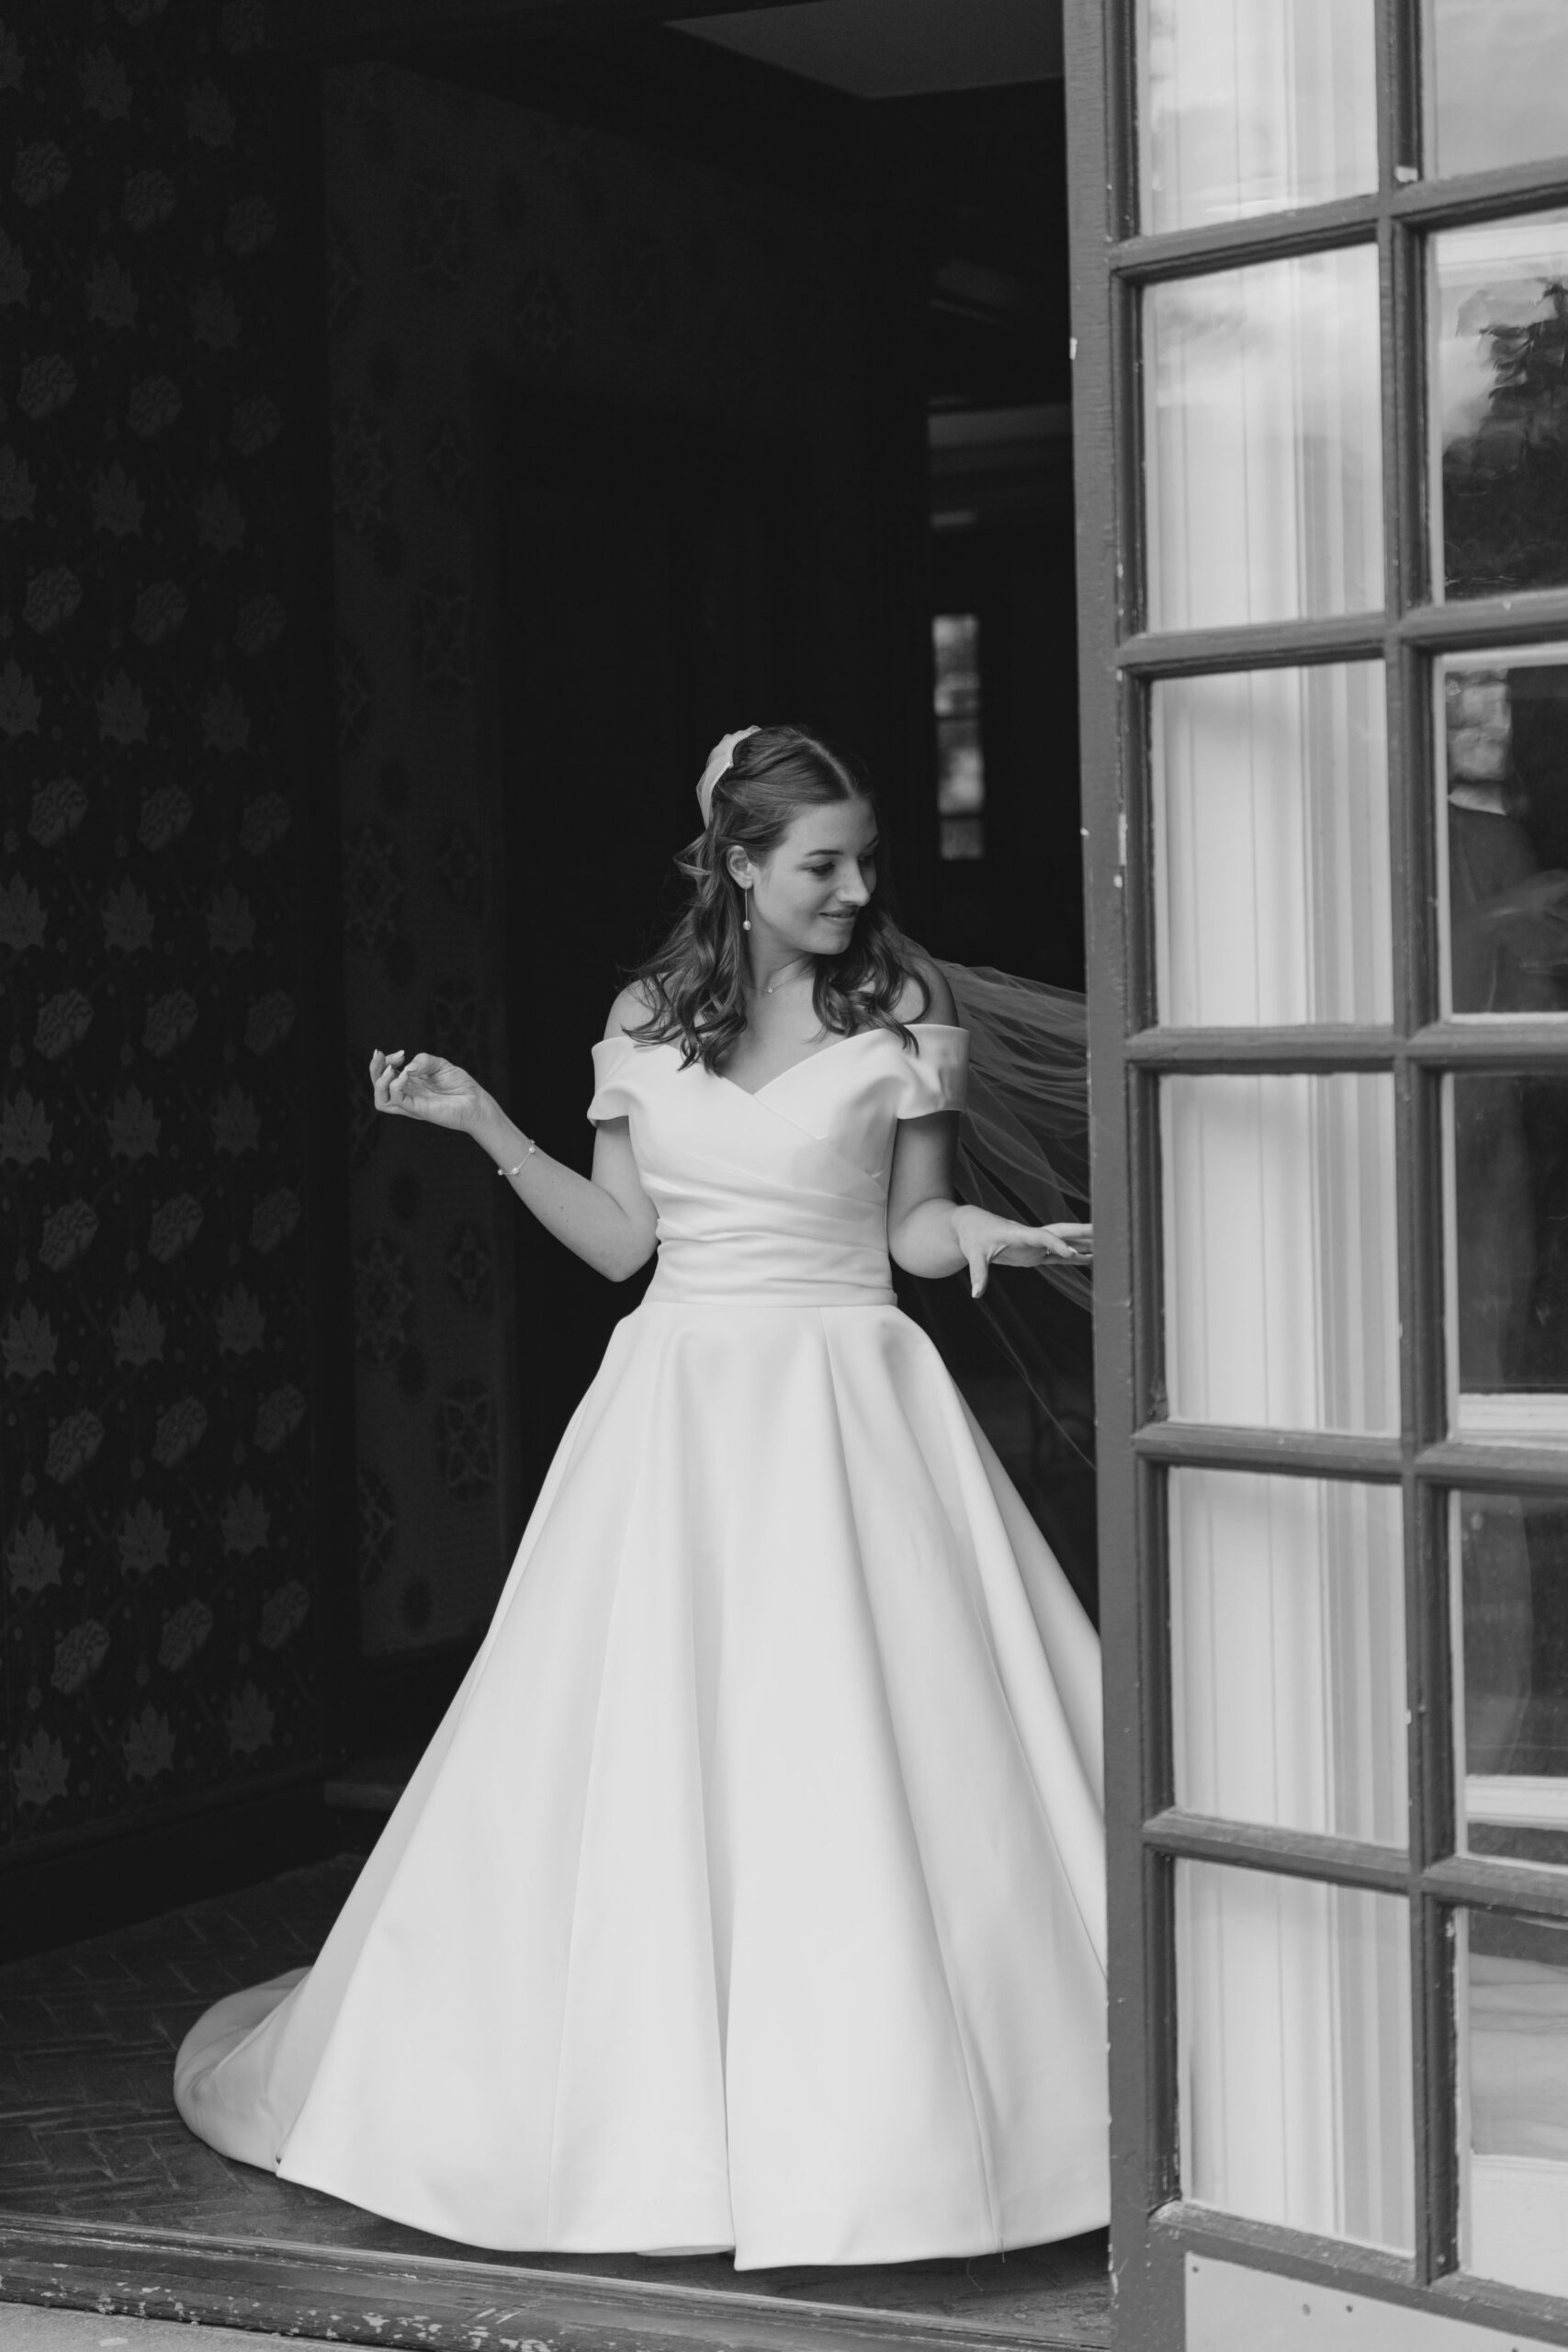 Candid black and white moment while bride gets dress bustled at boston summer wedding.